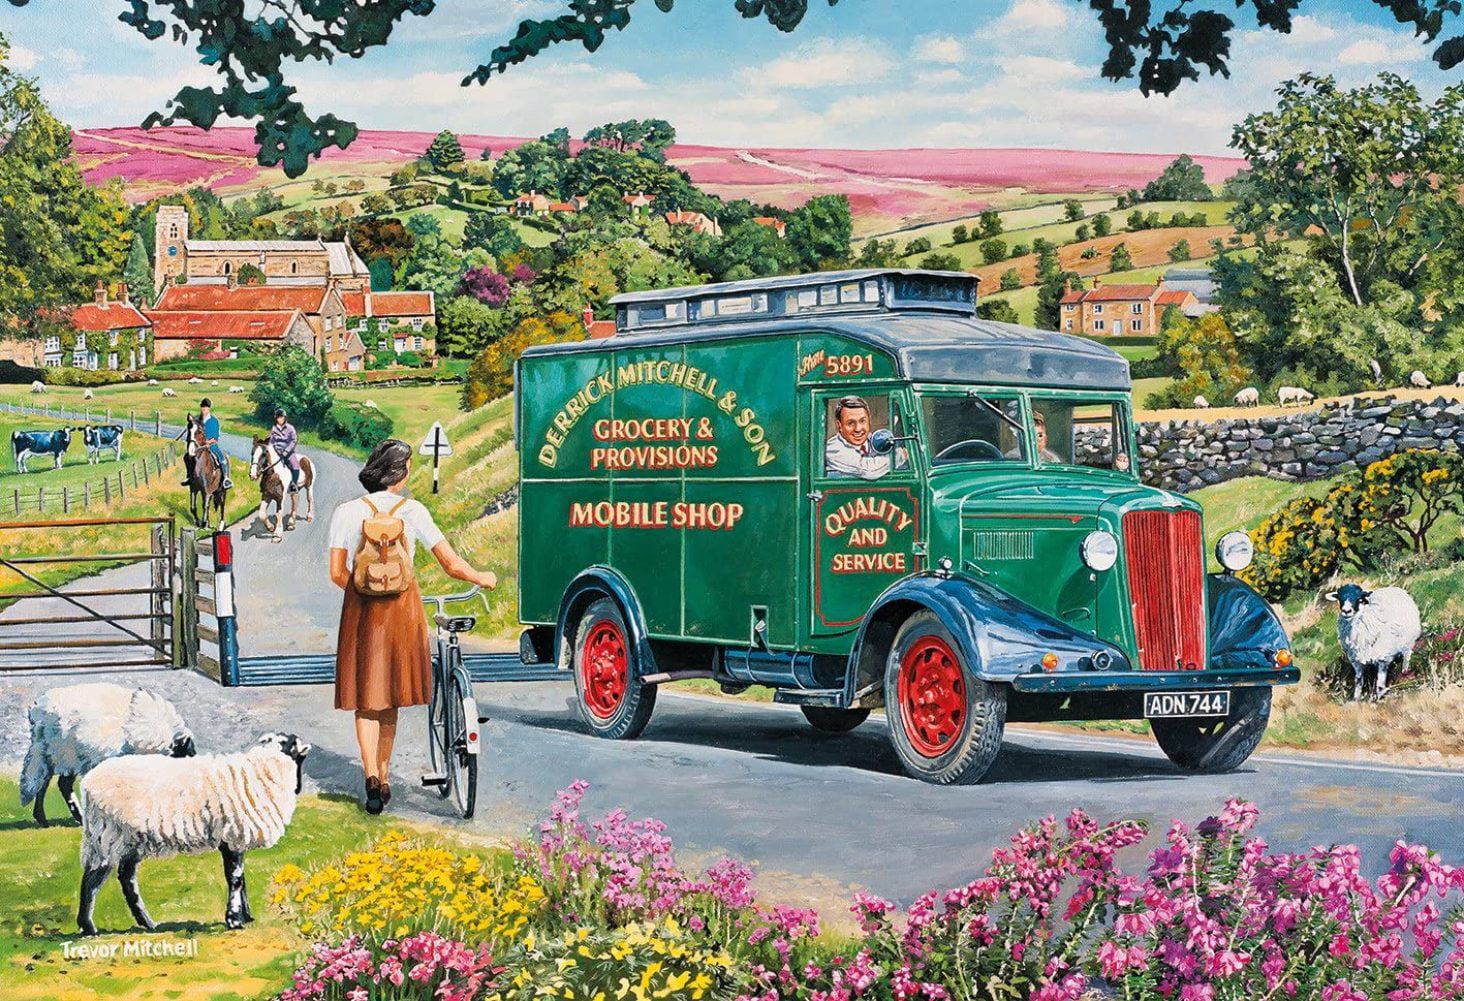 Gibsons Mitchell's Mobile Shop 4 X 500 PIECE JIGSAW PUZZLES 